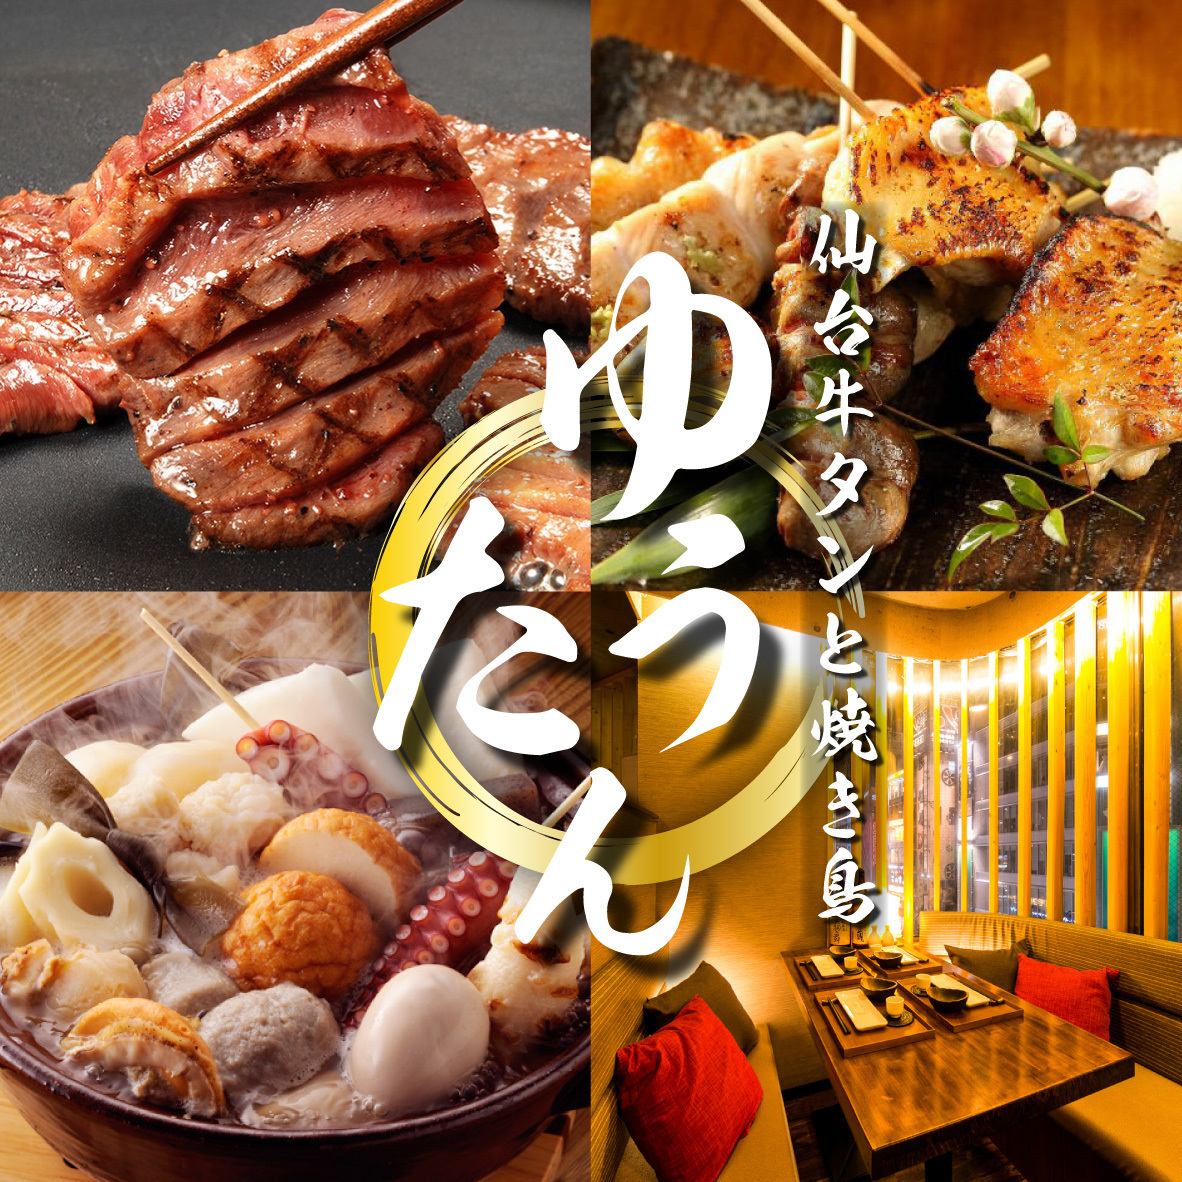 ■Private room Sendai beef tongue and charcoal-grilled chicken Yutan Shinjuku store ■Banquet/entertainment/online reservation 24 hours